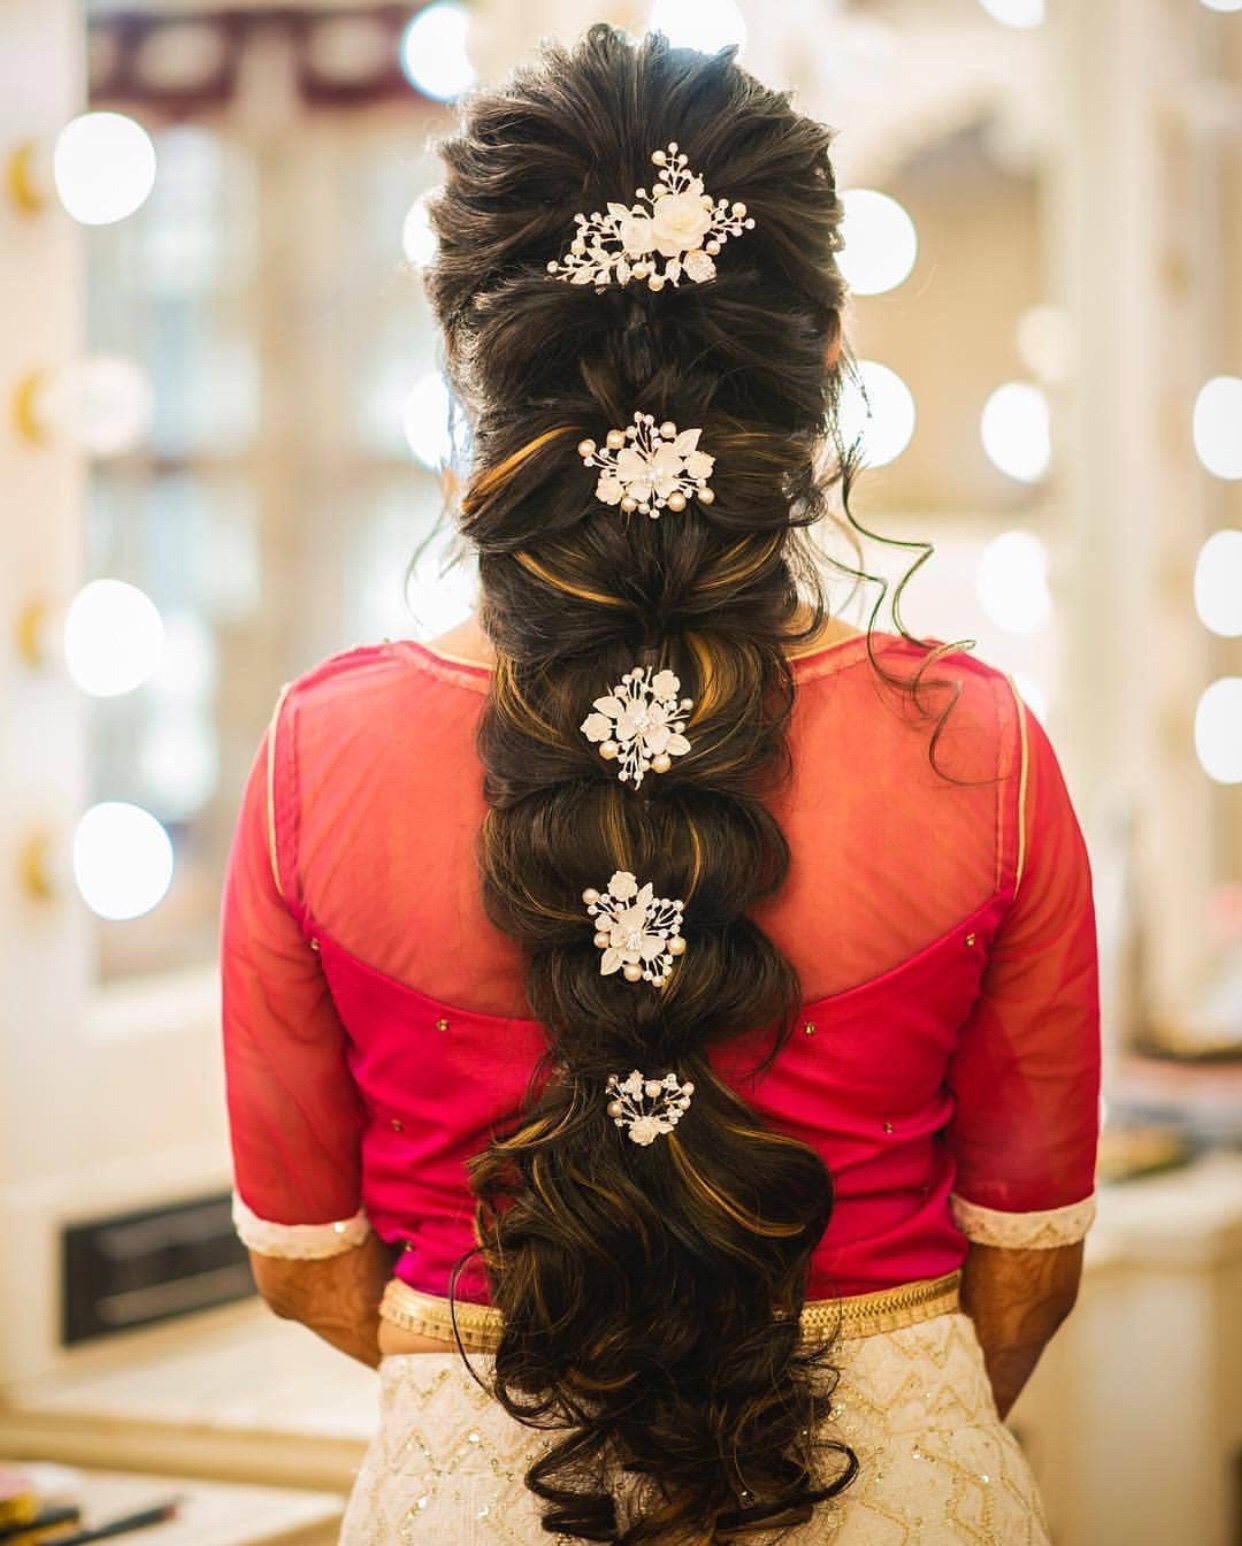 Top 11 Bridal Hairstyles For Curly Hair To Rock On Your DDay